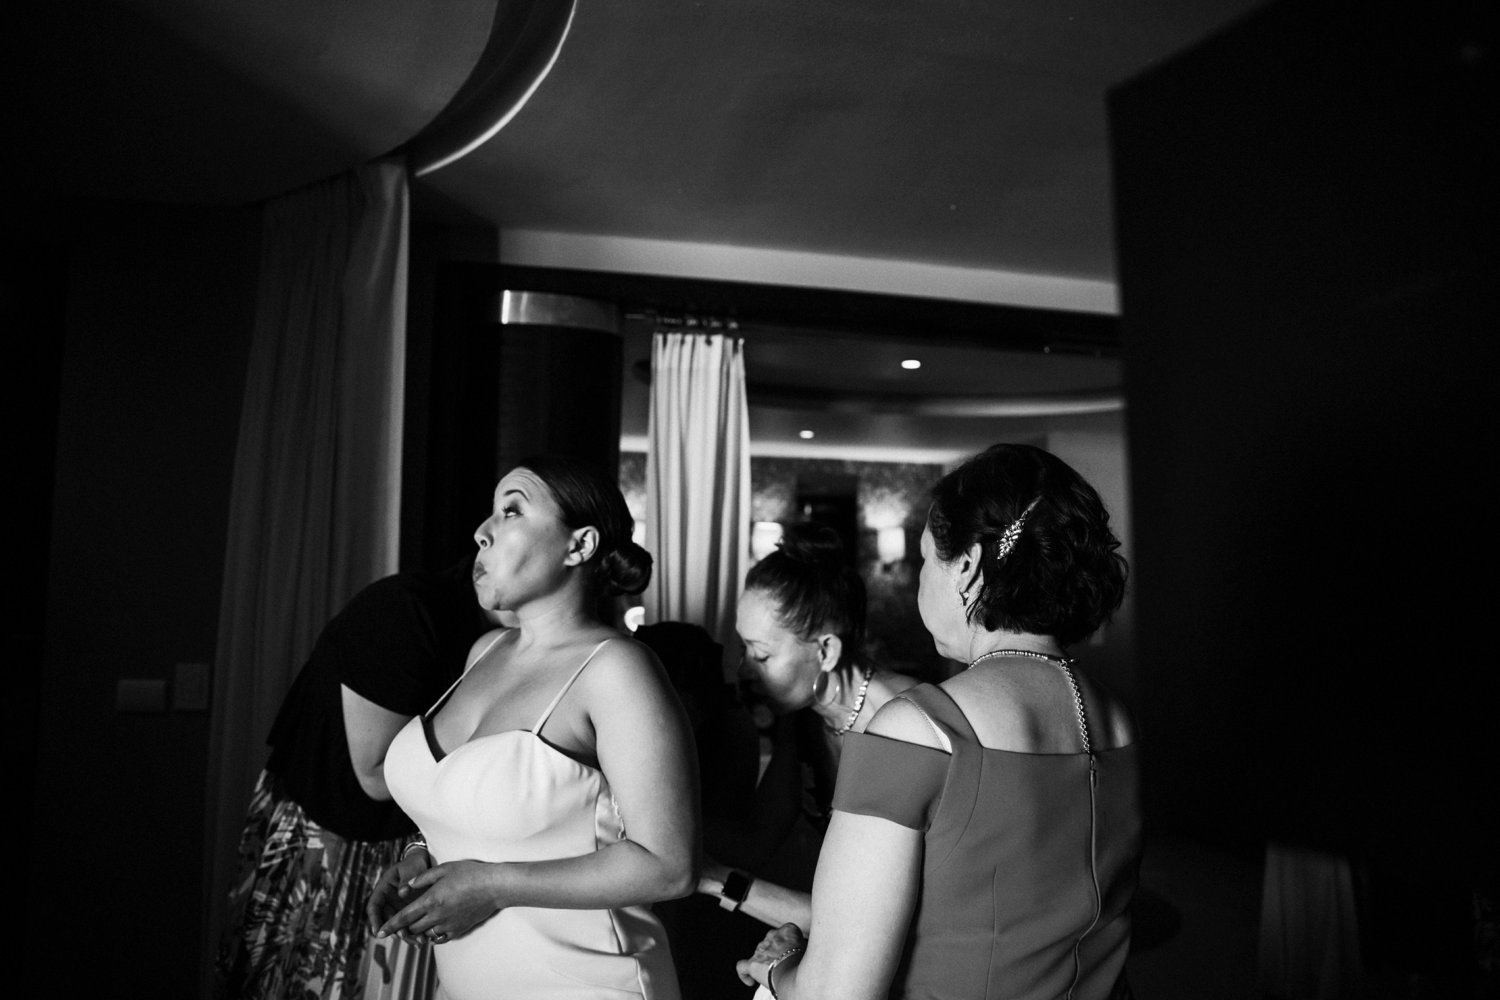  images by feliciathephotographer.com | destination wedding photographer | mexico | tropical | fiji | venue | azul beach resort | riviera maya | getting ready | details | black and white | putting on the dress | mother of the bride | jaehee atelier | pre-ceremony | 